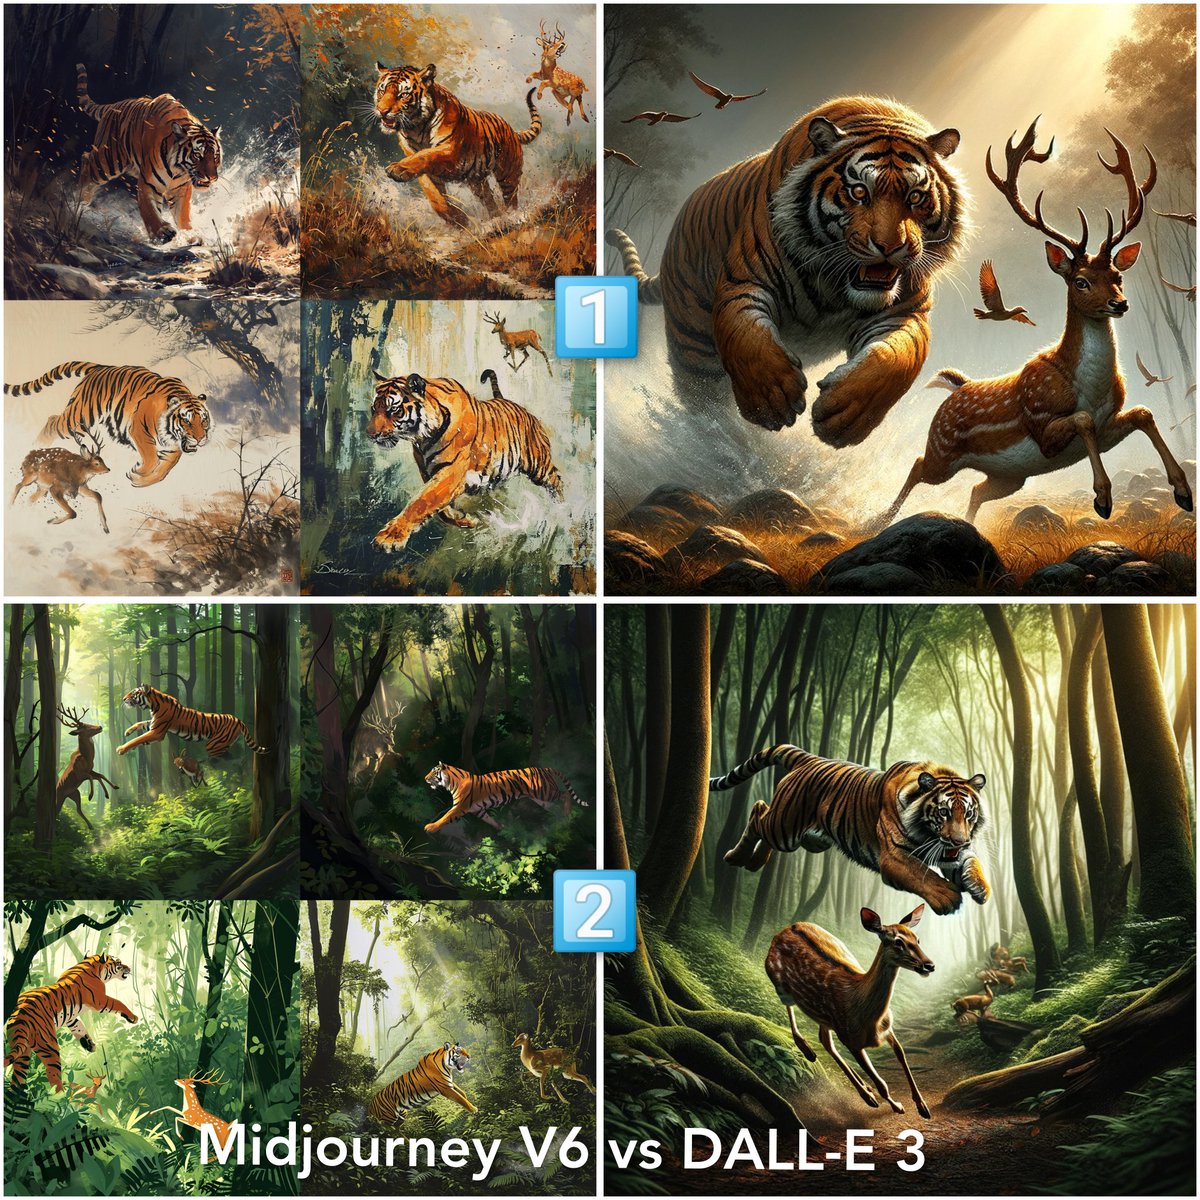 It is still not possible to make a tiger chase a deer in a believable way on Midjourney V6!

Prompts used: 

1️⃣ Tiger chasing a deer --s 0 --v 6.0

2️⃣ A tiger chasing a deer through a dense forest. The scene captures the intense moment with the tiger in mid-leap, its stripes…